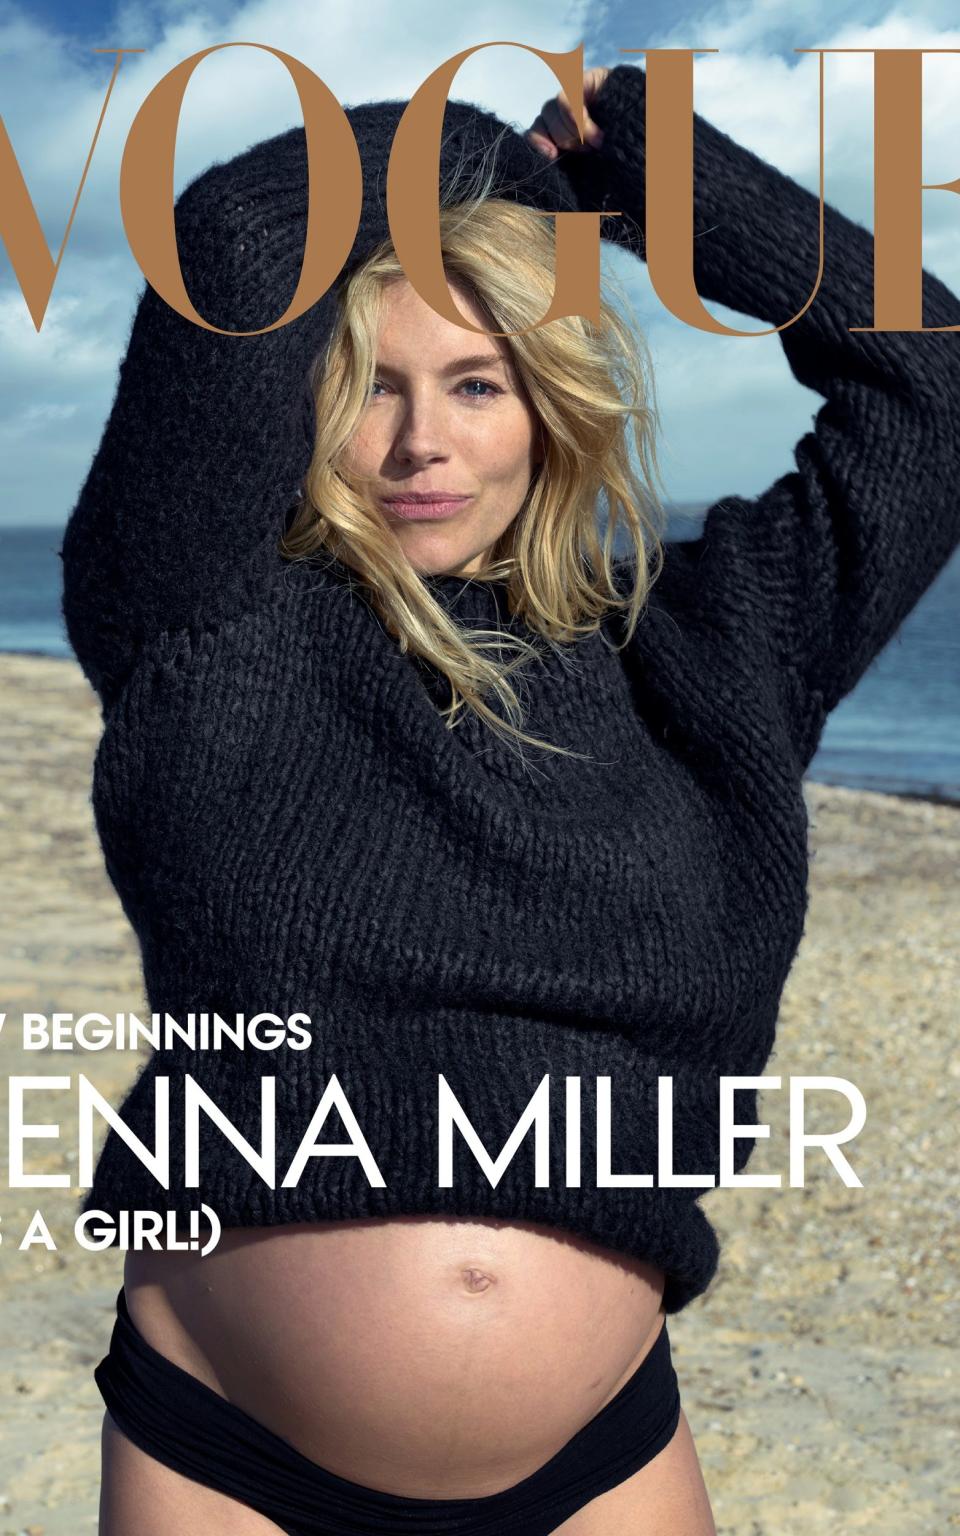 Sienna Miller on the Cover of US Vogue